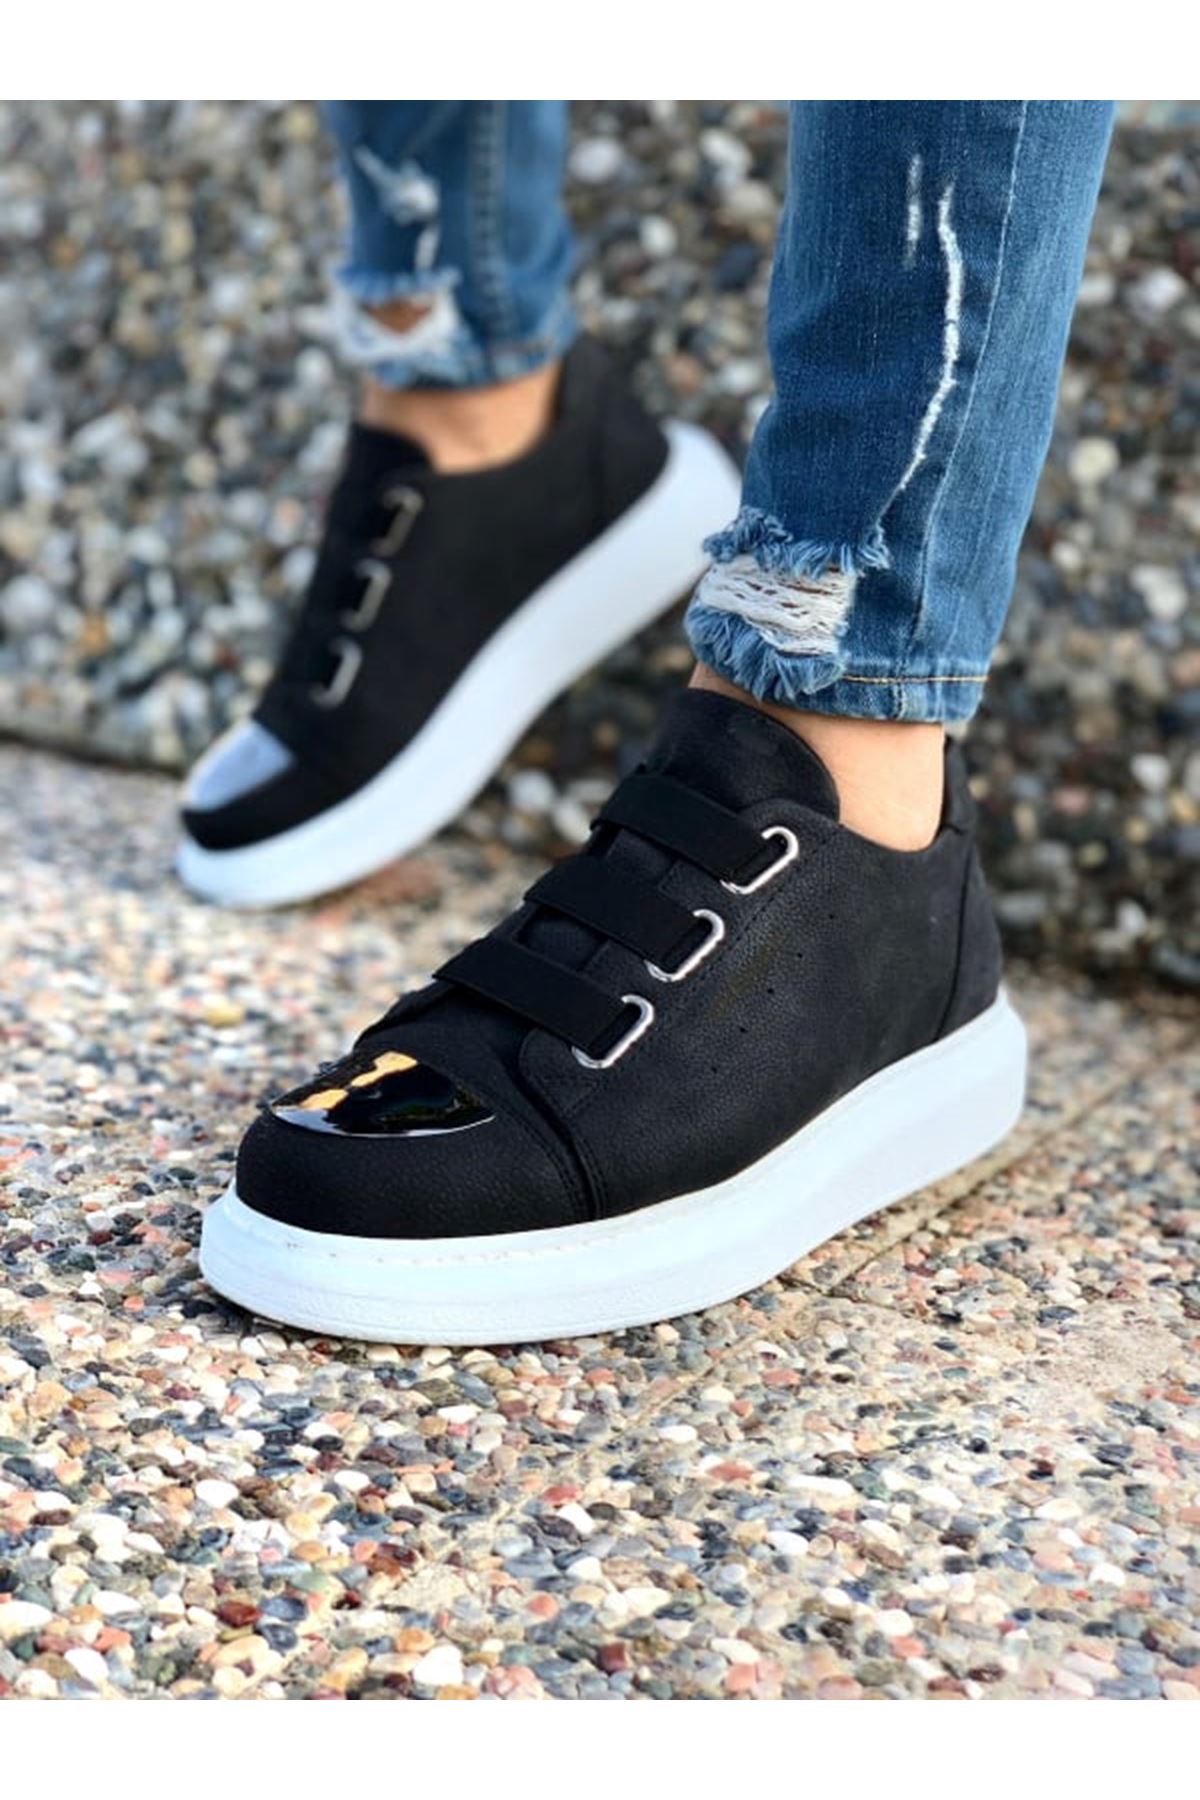 Chekich Men's Shoes Black Color Elastic Band Closure Artificial Leather Spring and Fall Seasons Slip On Unisex Fashion Sneakers Walking Luxury Lightweight Comfortable Original Flexible Footwear Solid Hot Sale CH251 V6